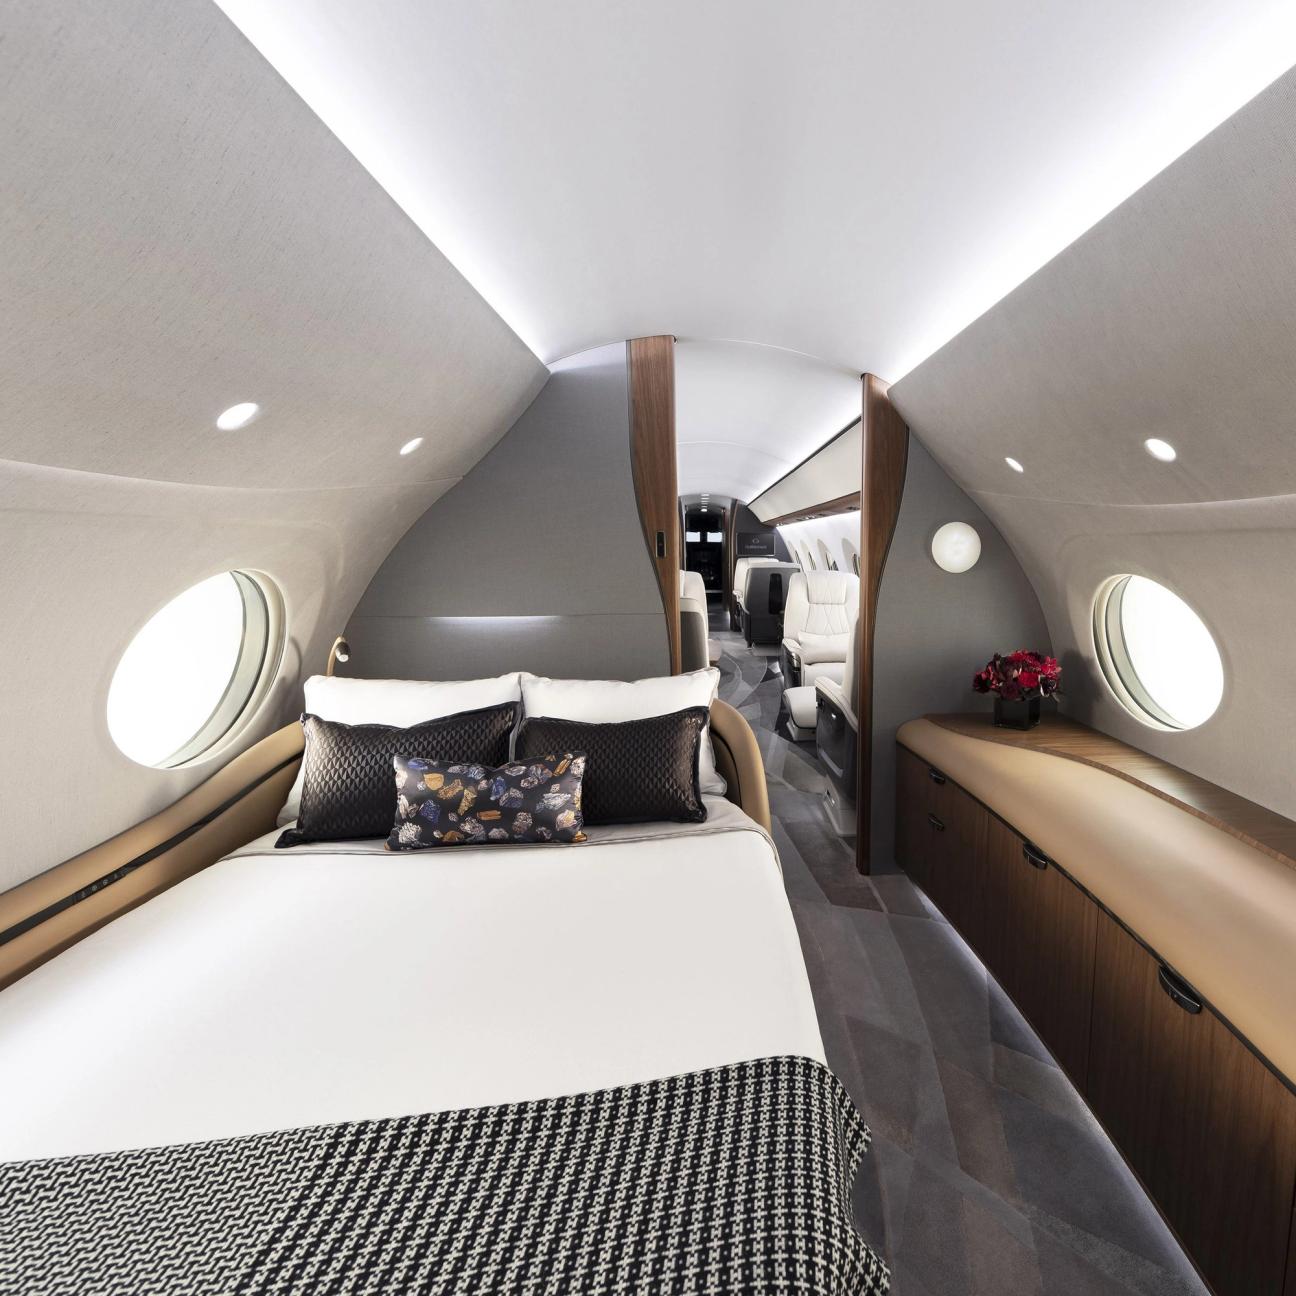 Step onboard the world’s largest private jet, the Gulfstream G700 ...